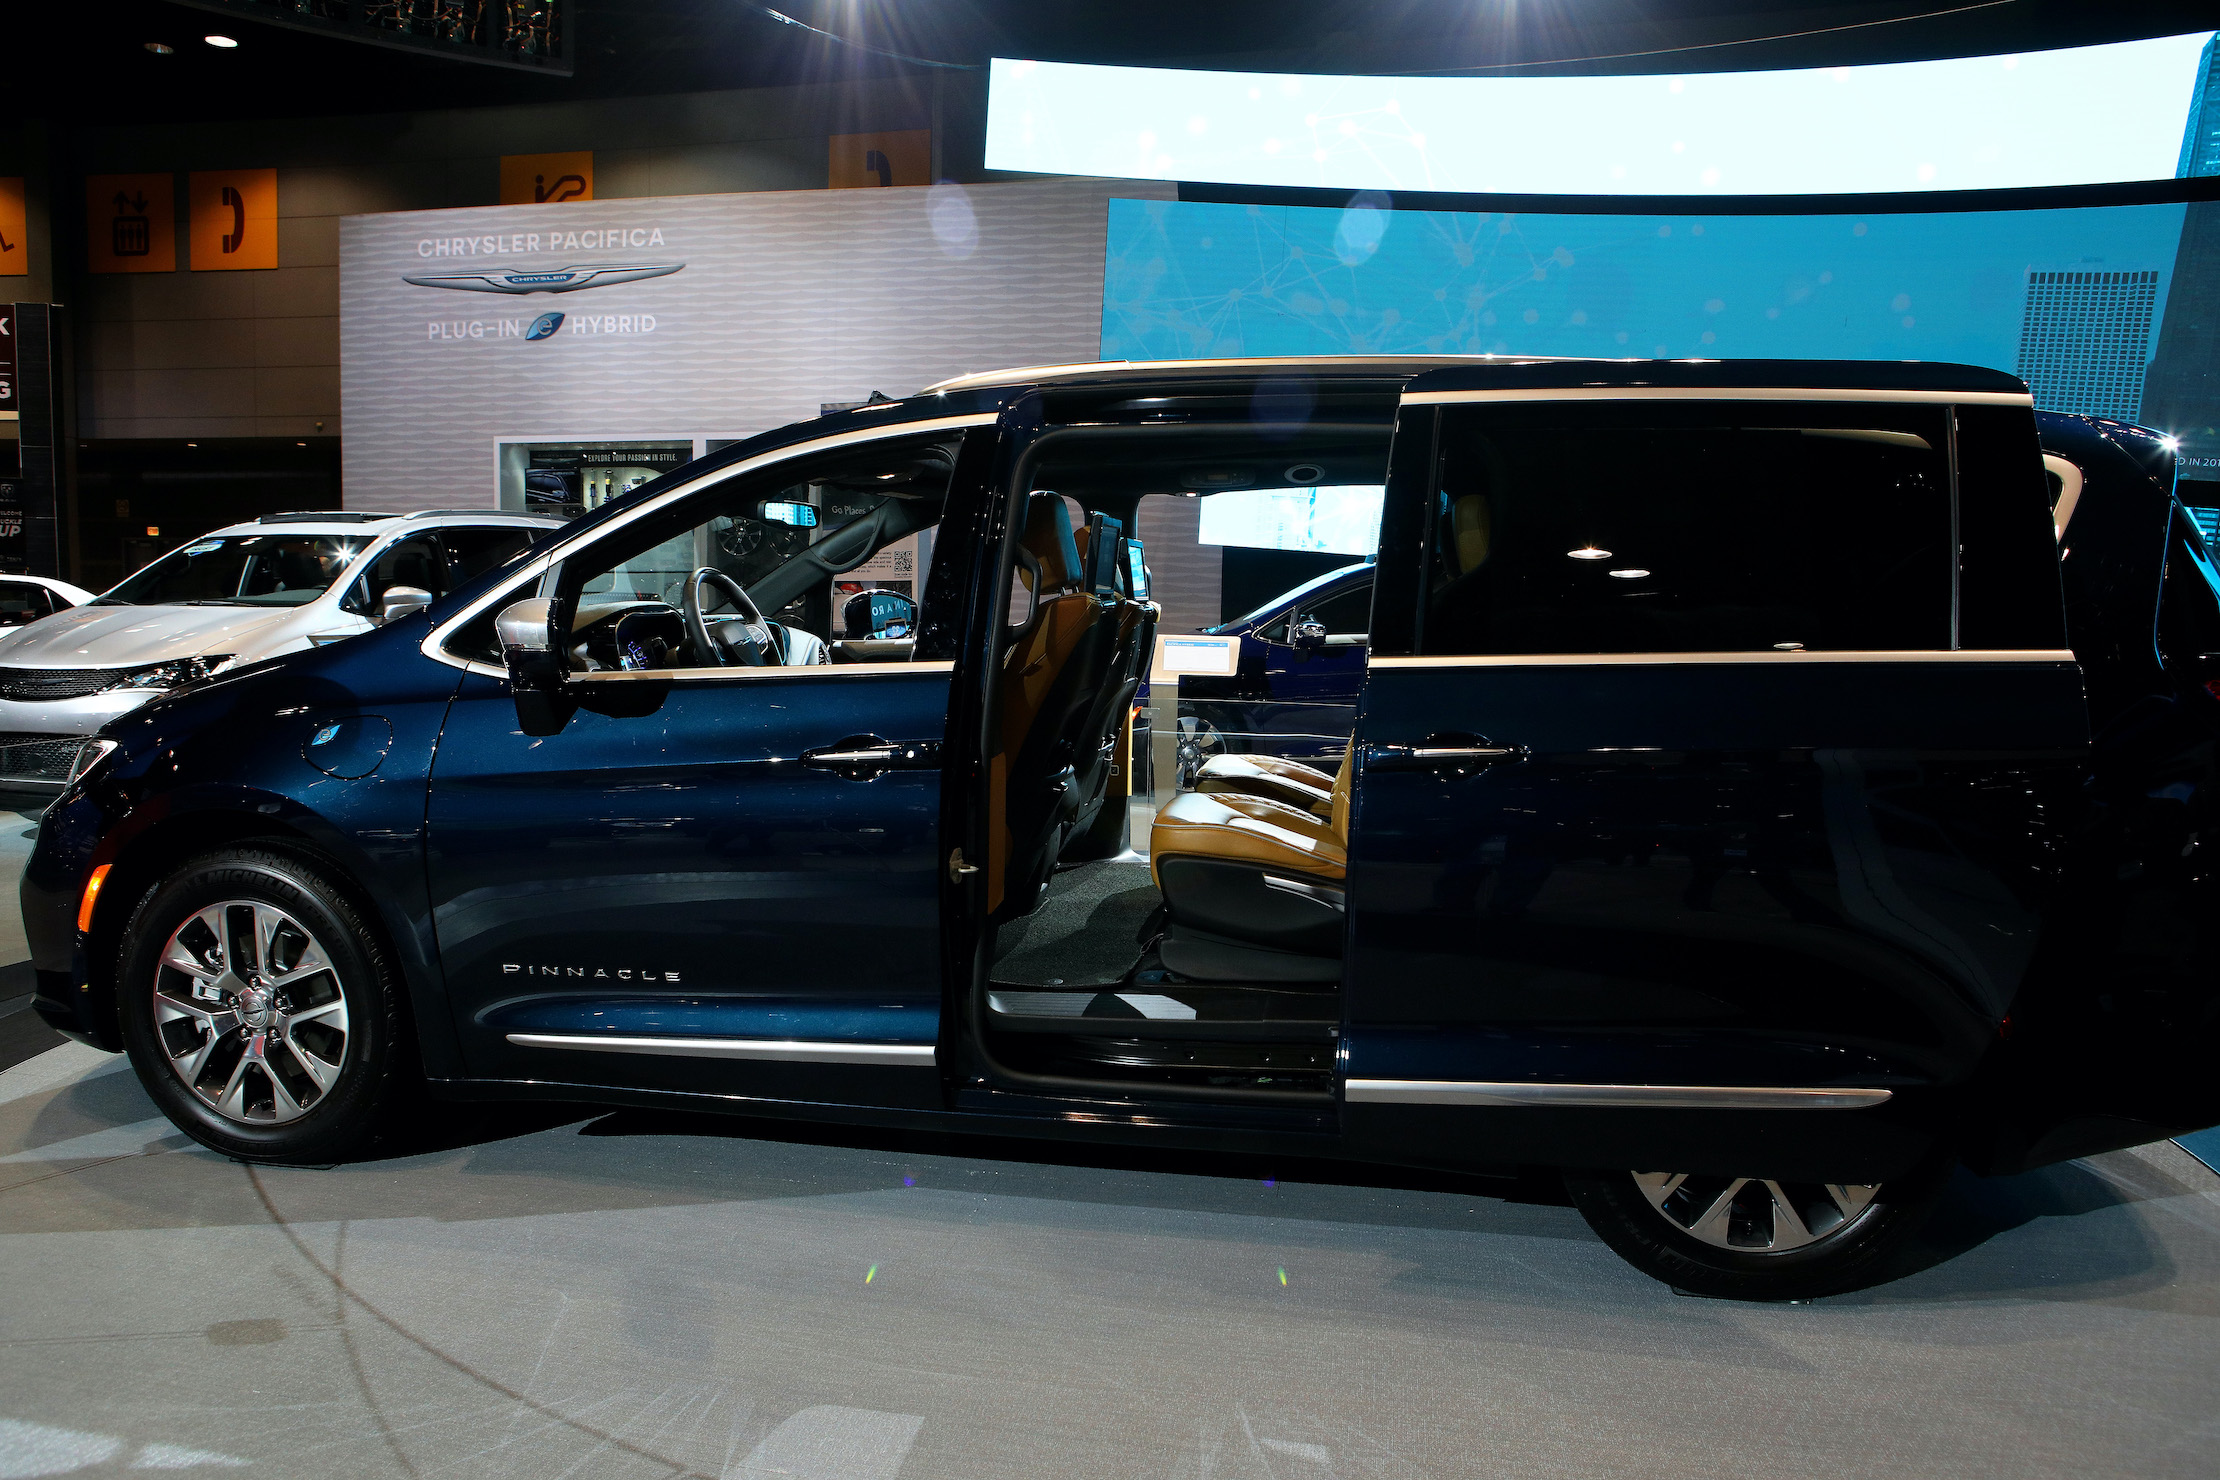 2021 Chrysler Pacifica Pinnacle is on display at the 112th Annual Chicago Auto Show